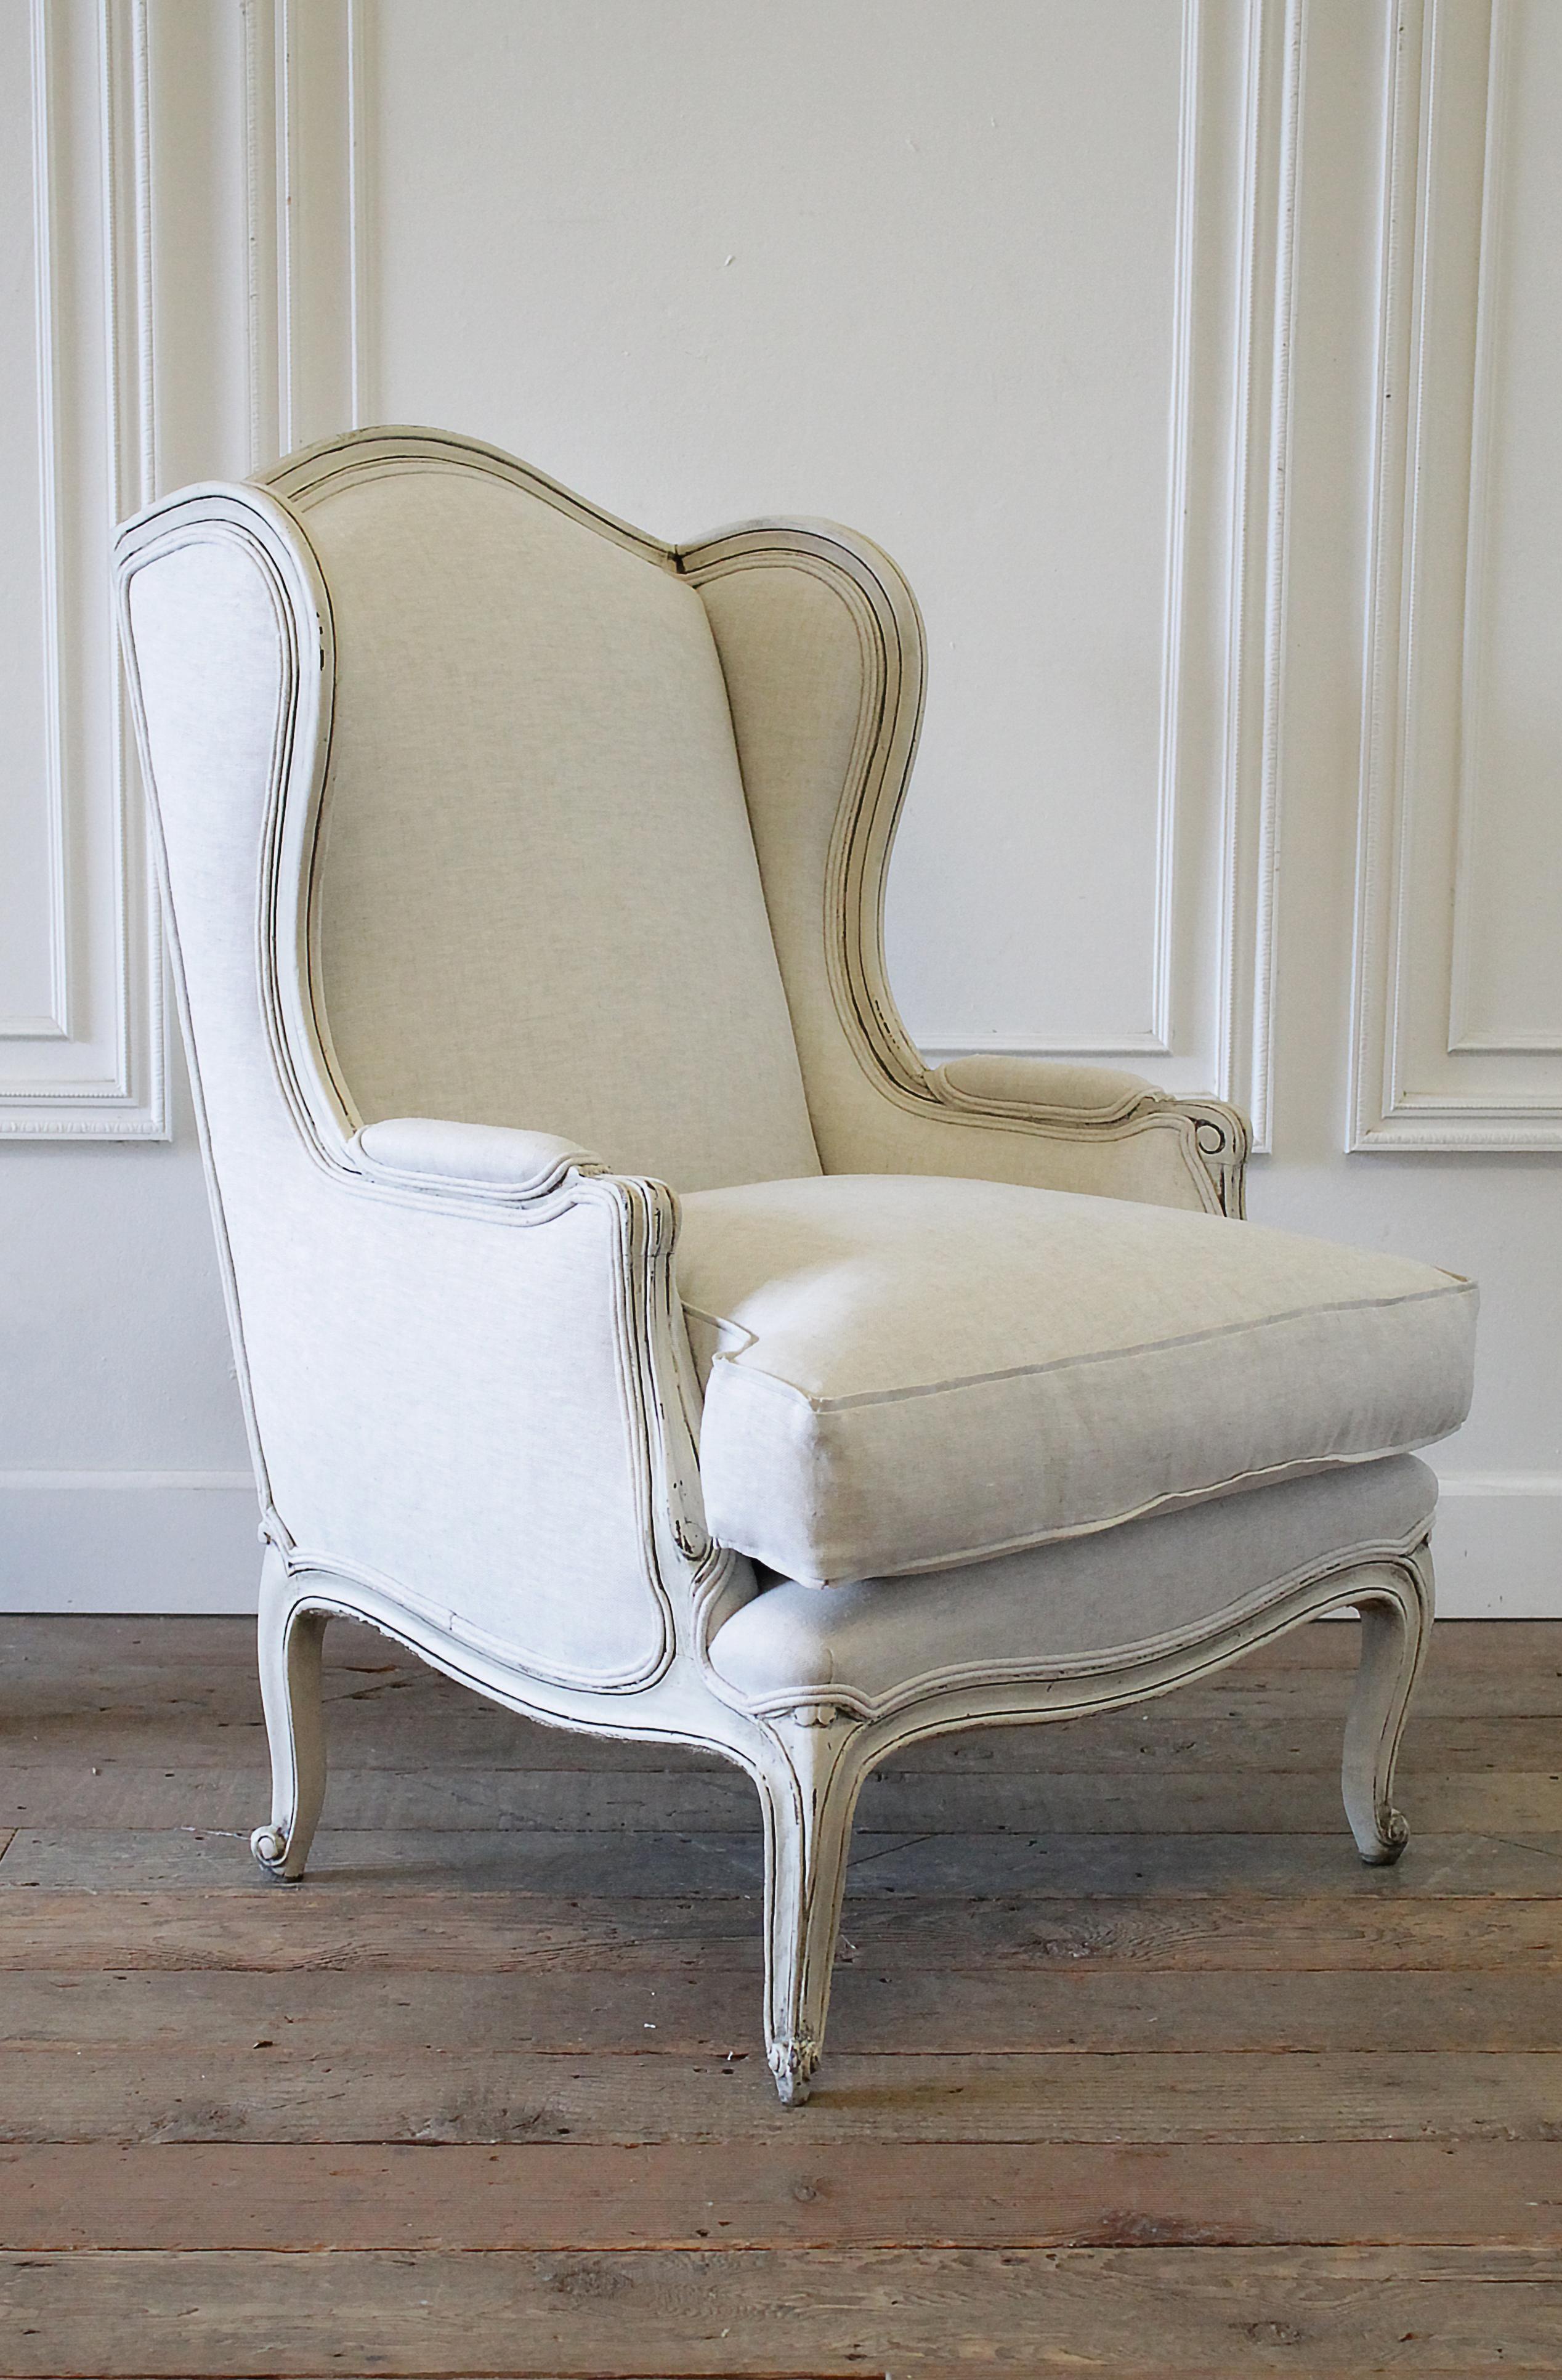 Vintage French Provincial Wingback Style Chair Upholstered in Natural Linen 6